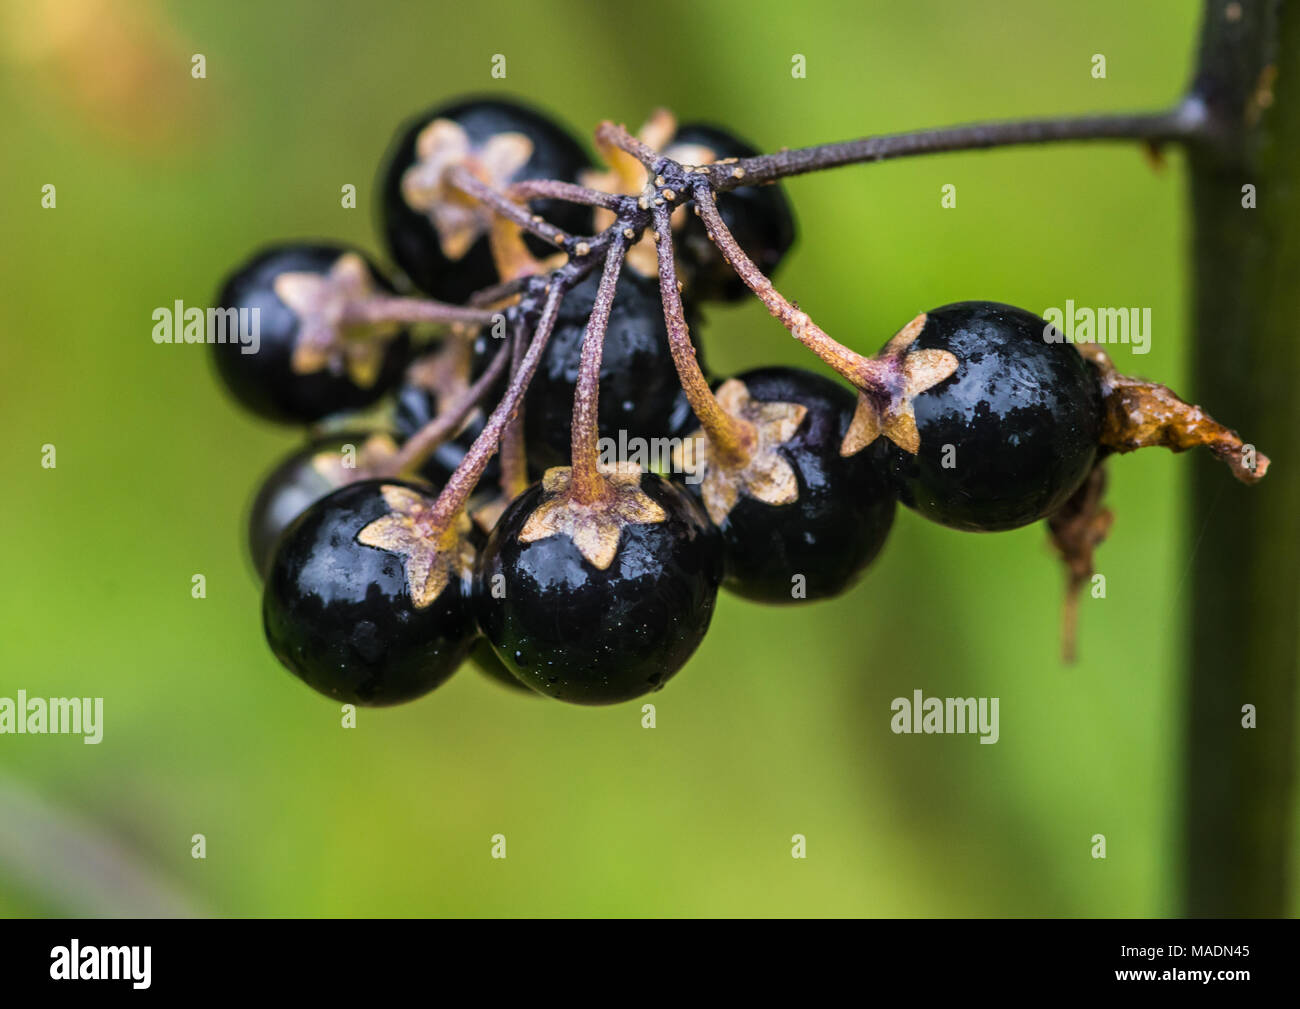 A macro shot of a collection of black berries on a potato plant. Stock Photo